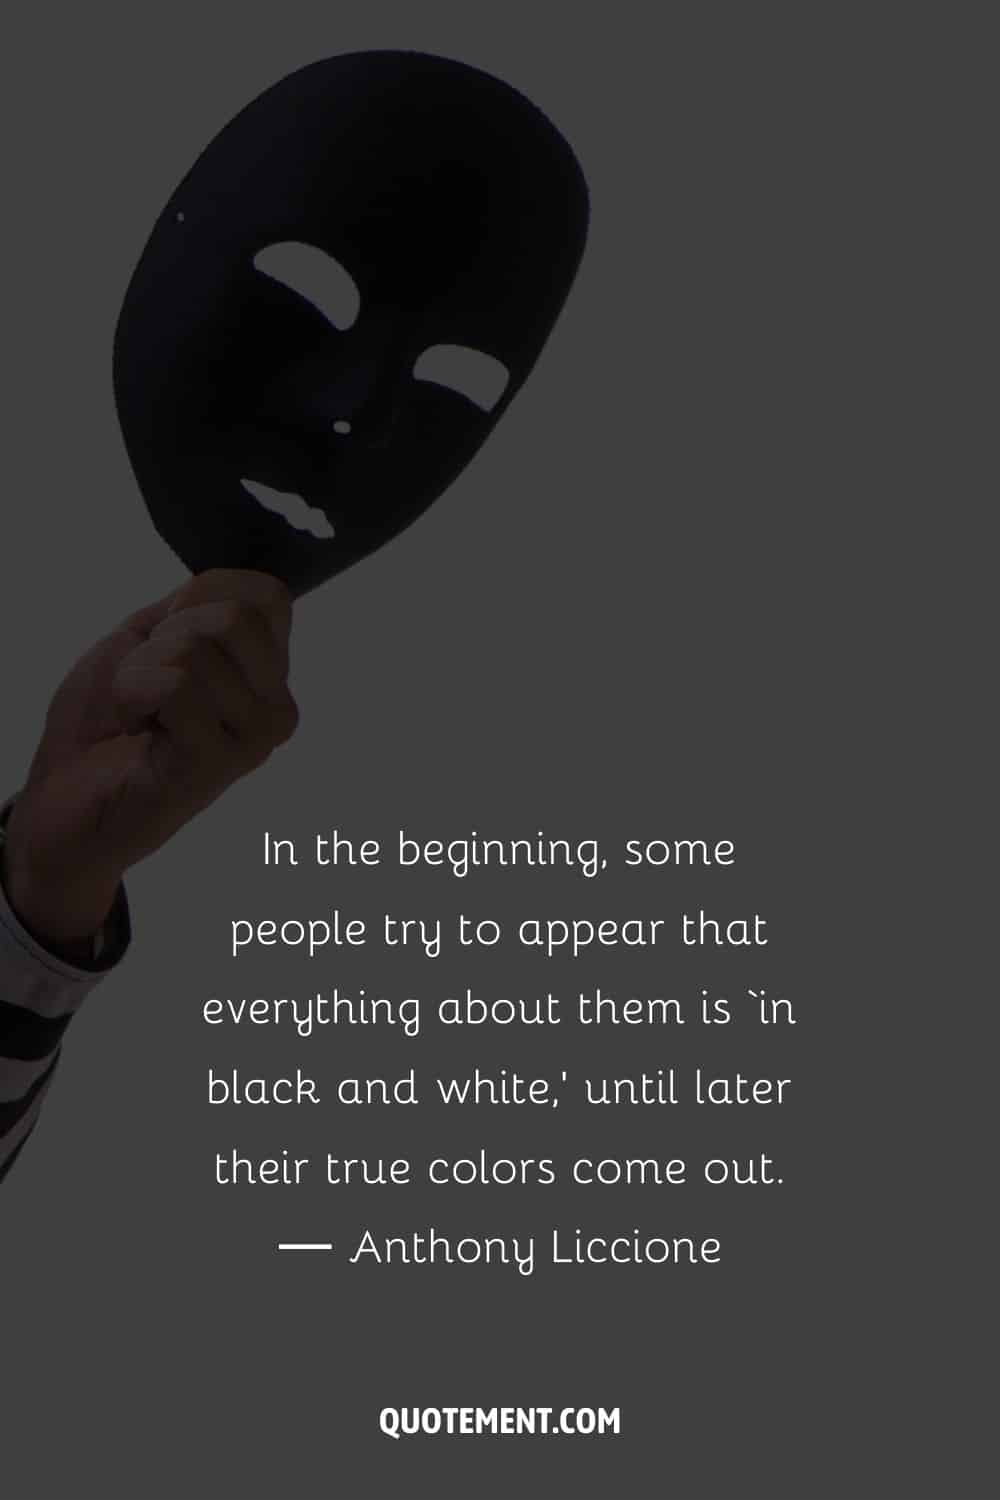 In the beginning, some people try to appear that everything about them is ‘in black and white,’ until later their true colors come out